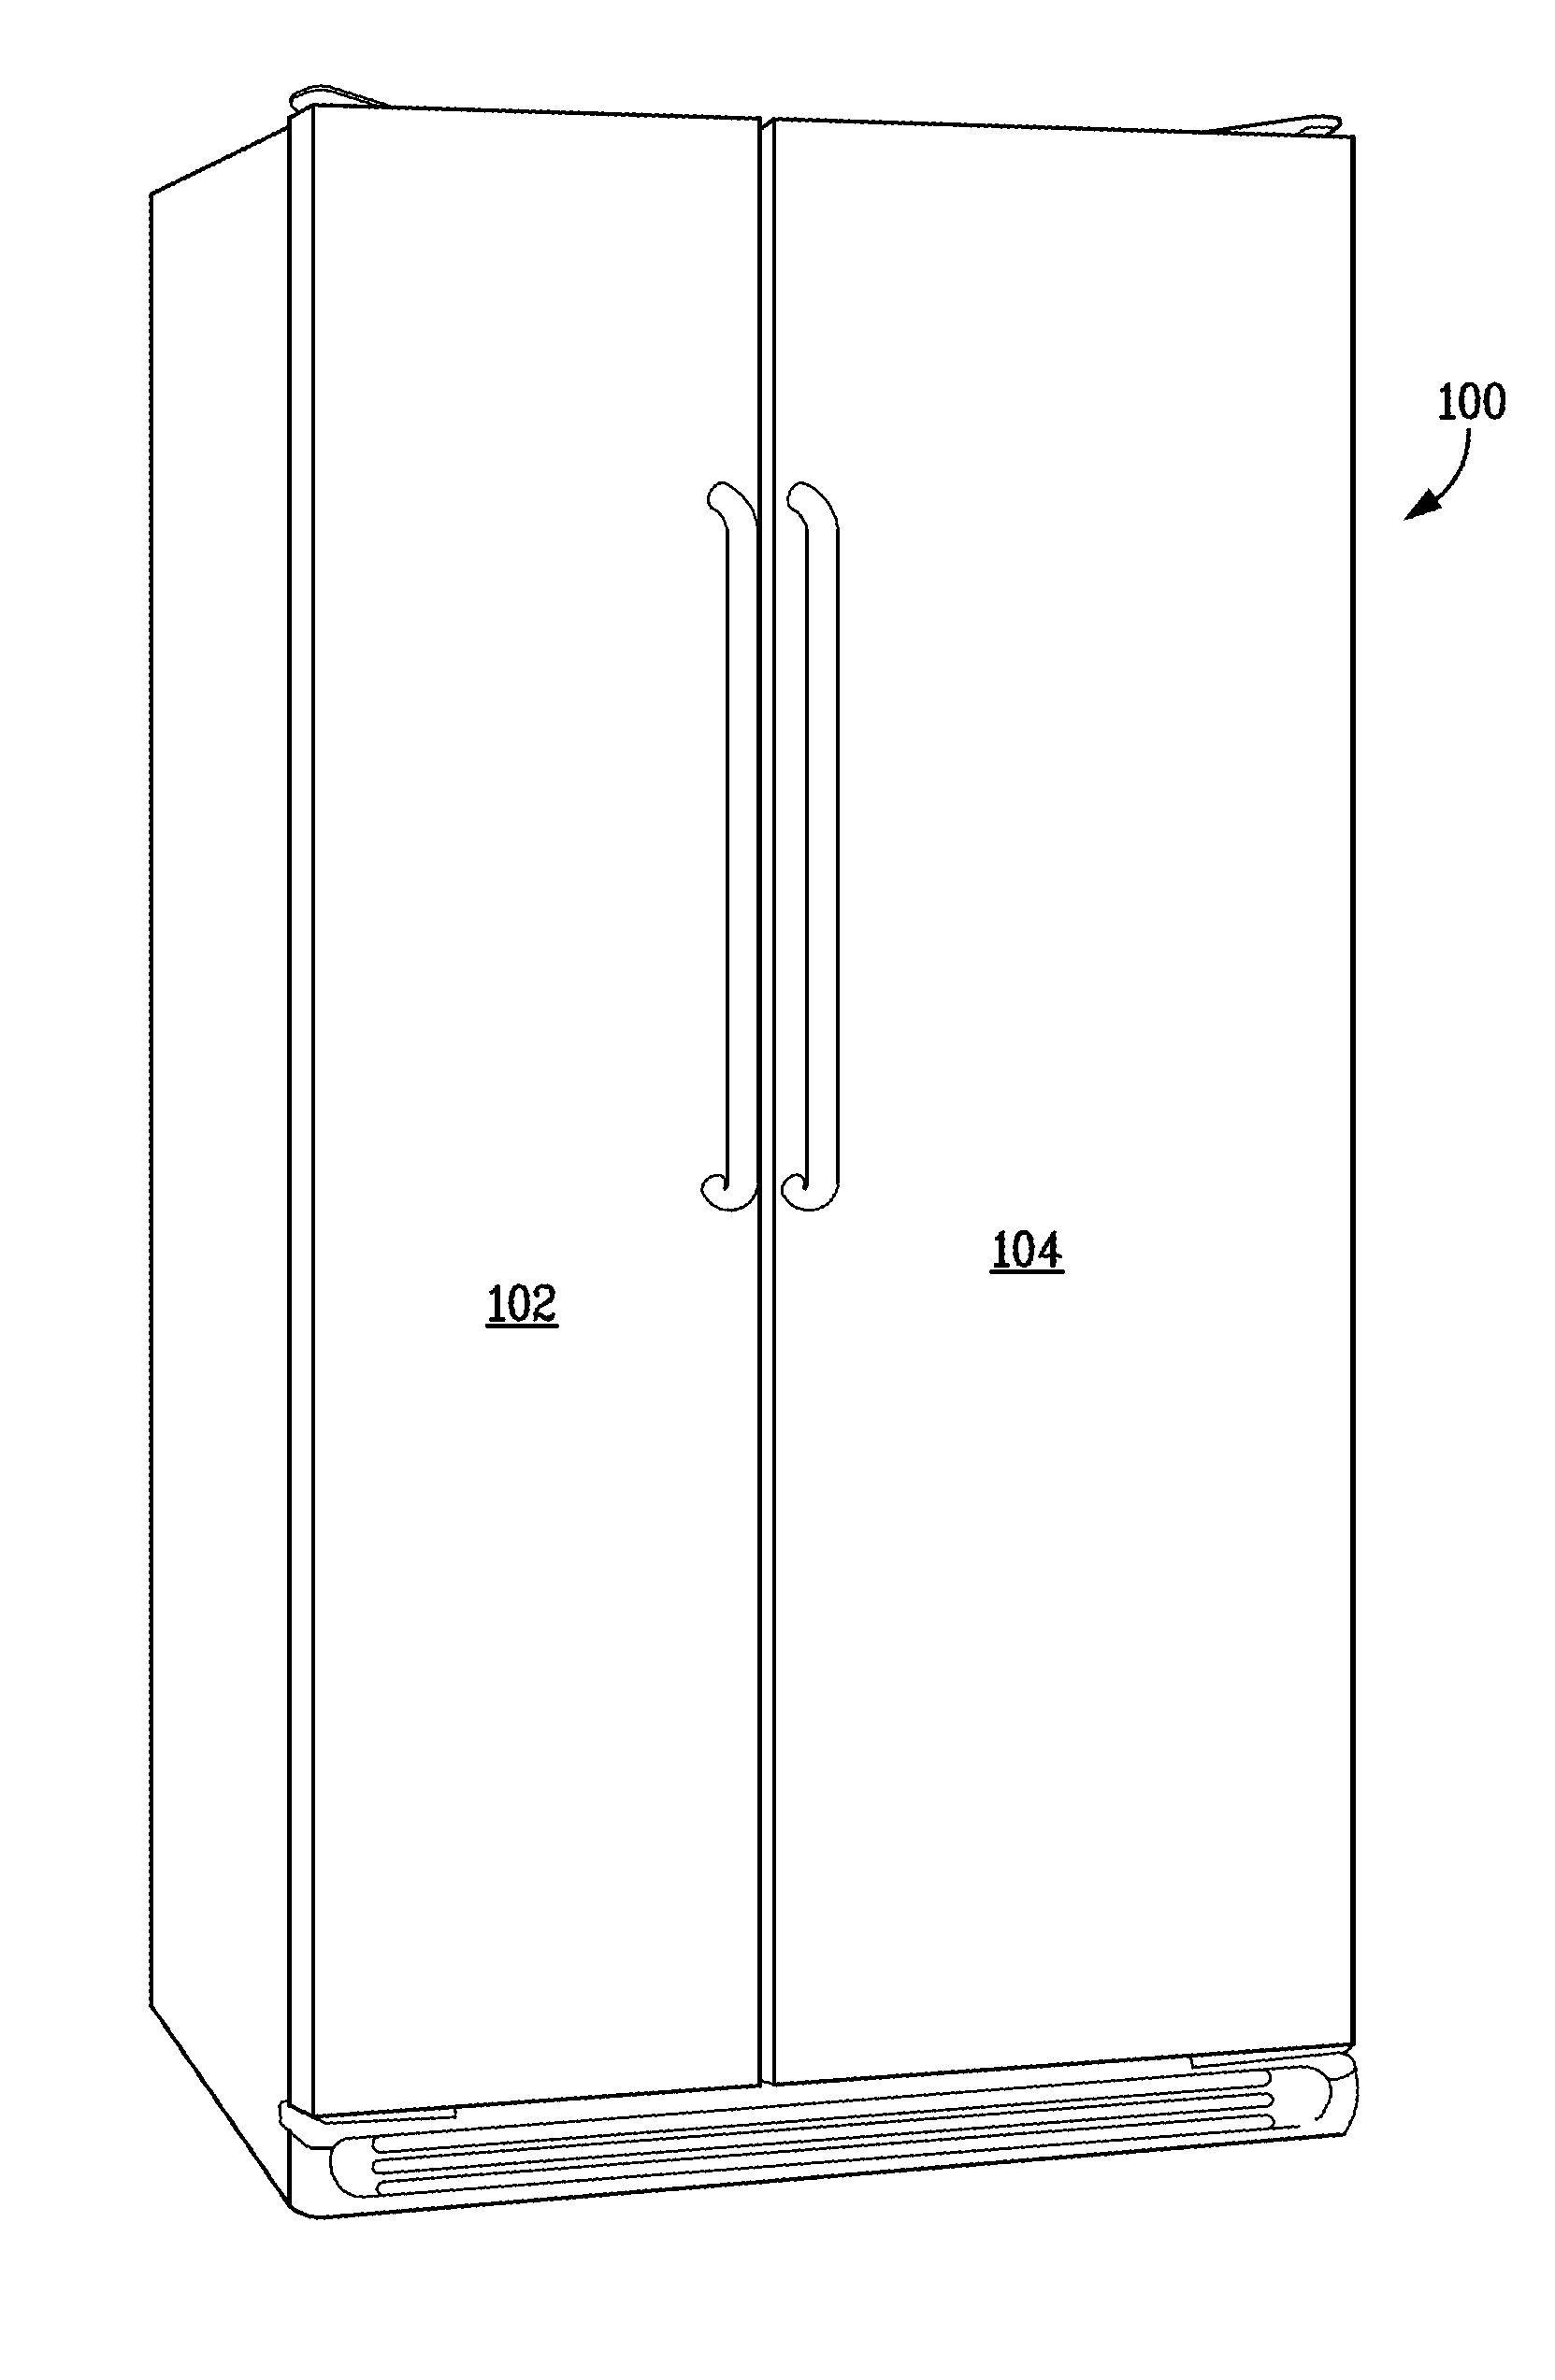 Auger-driven icemaker system for refrigerator